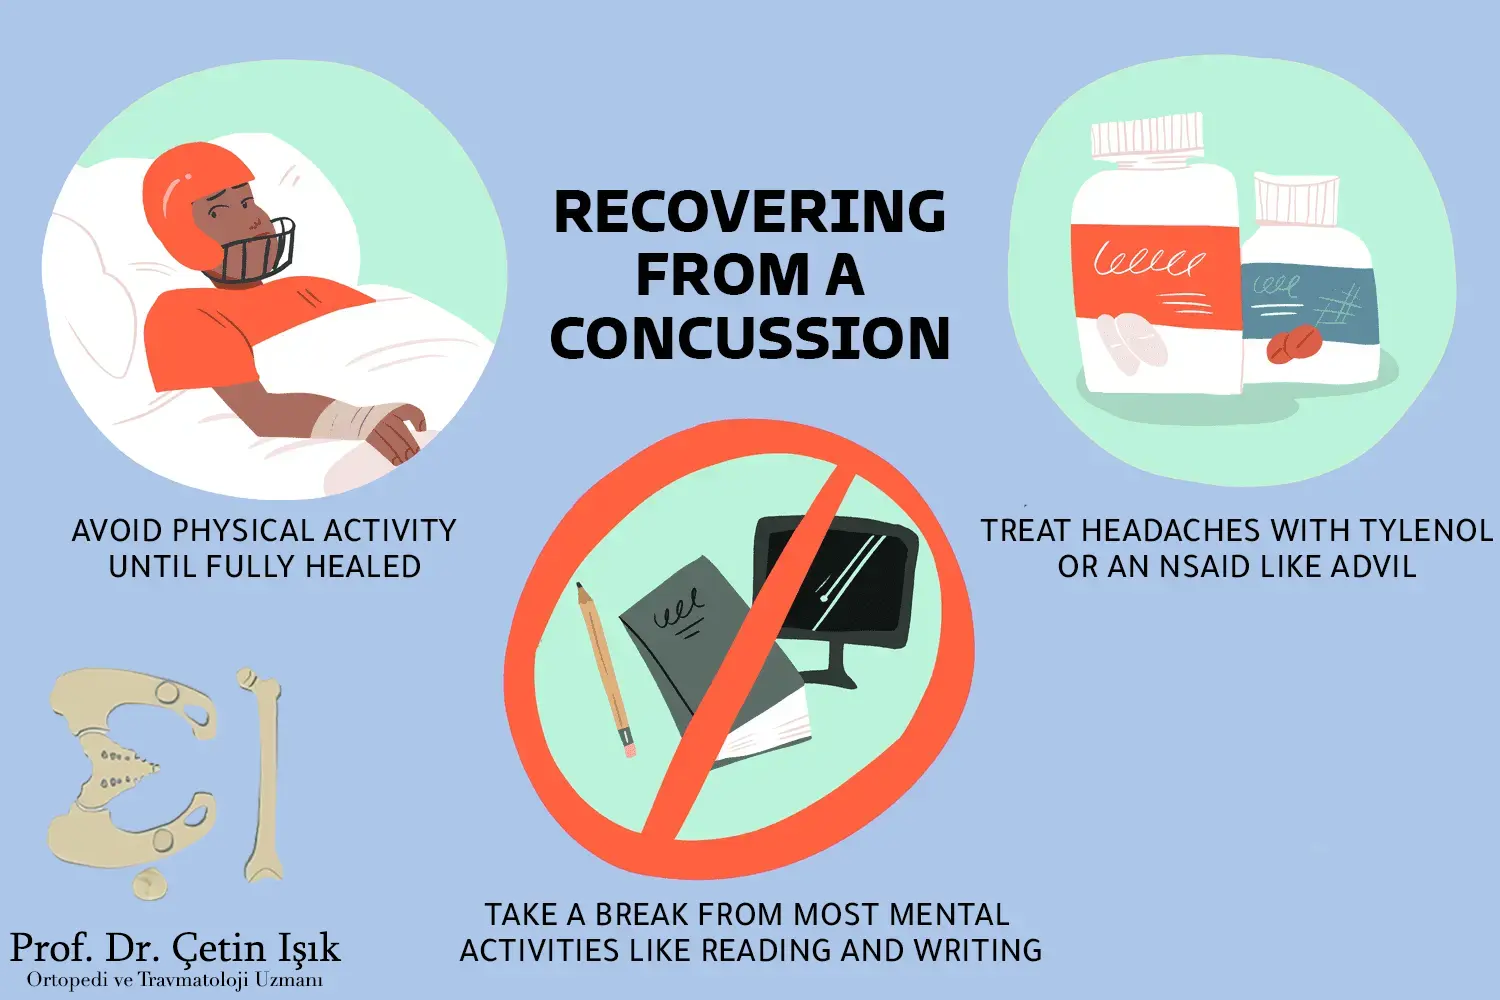 We notice from the picture some first aid that must be done when treating a skull fracture in adults because the brain may be exposed to a concussion during trauma, as physical activities should be avoided, headache should be treated with analgesic drugs, and mental activities such as reading should be stopped.